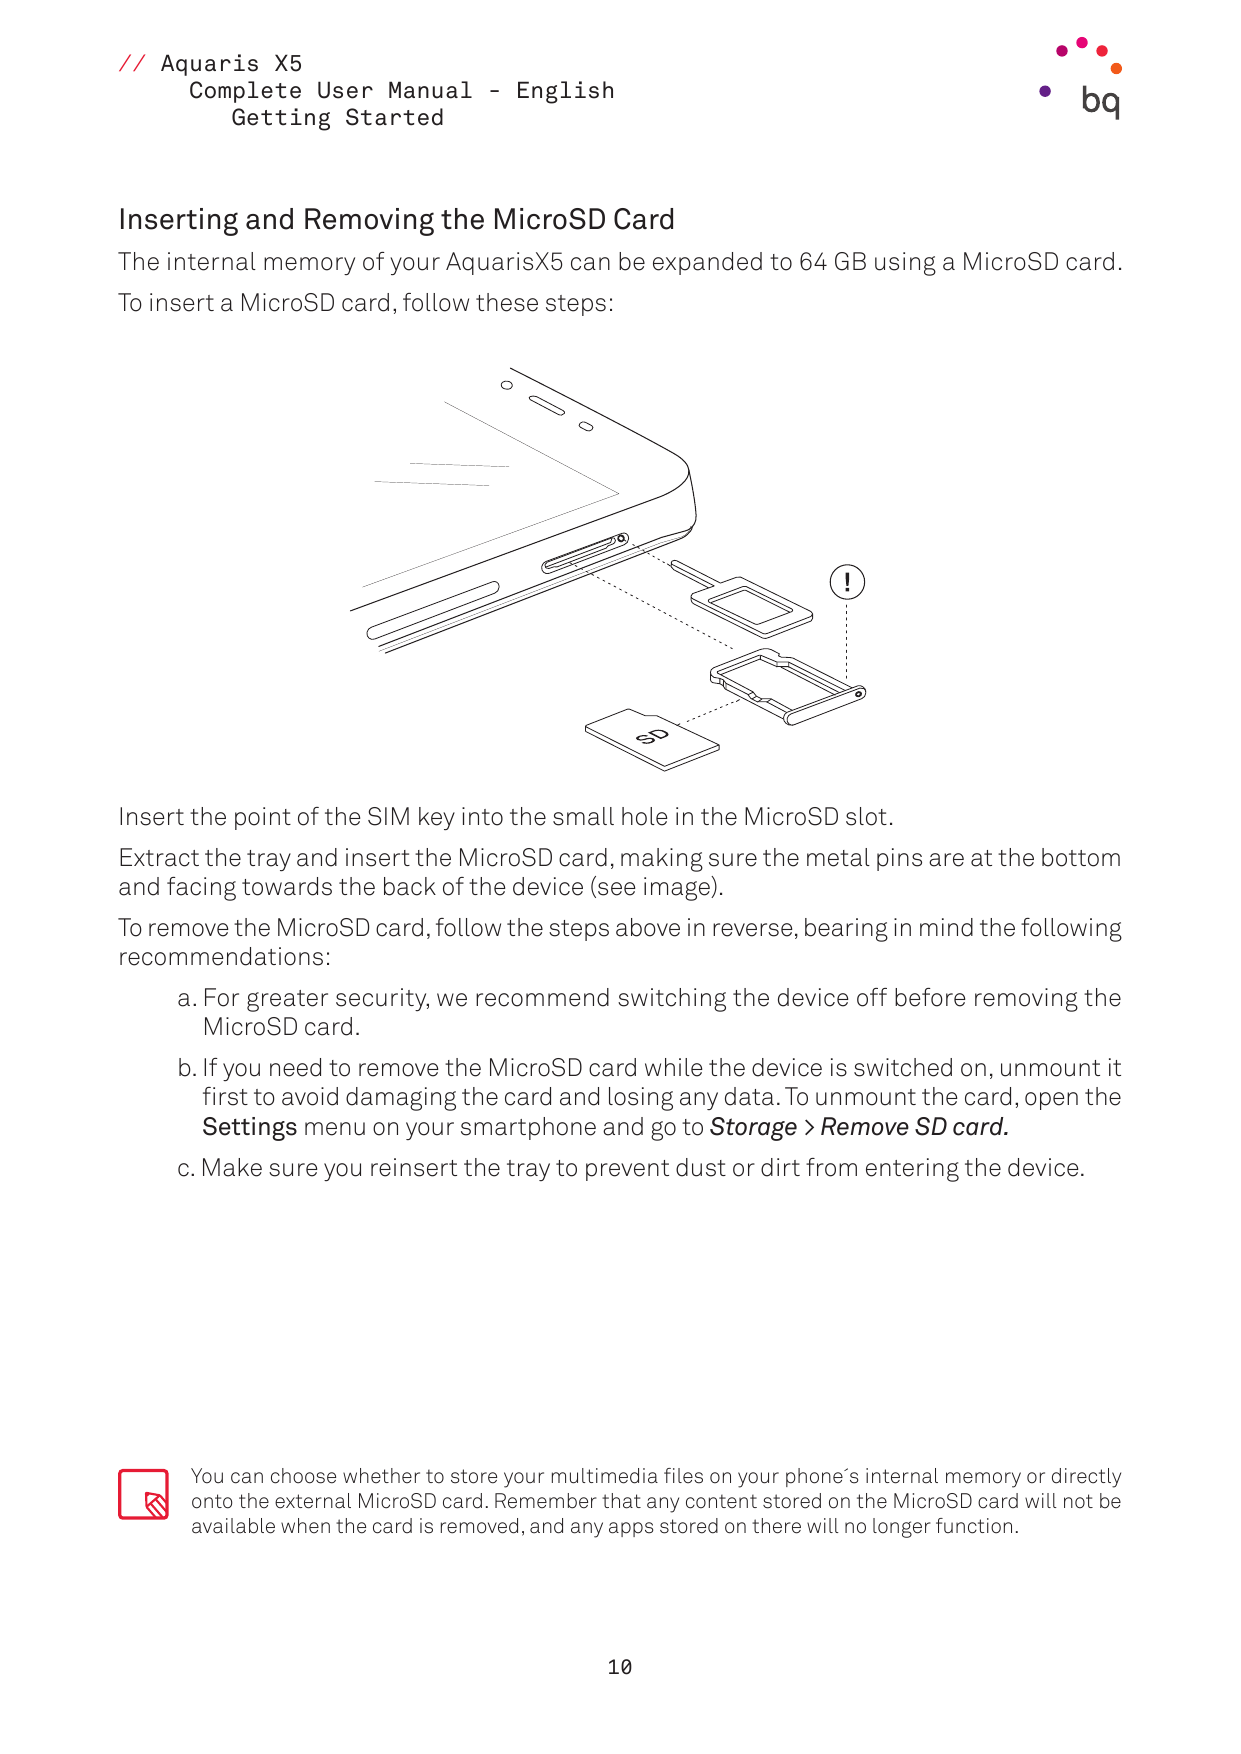 // Aquaris X5Complete User Manual - EnglishGetting StartedInserting and Removing the MicroSD CardThe internal memory of your Aqu